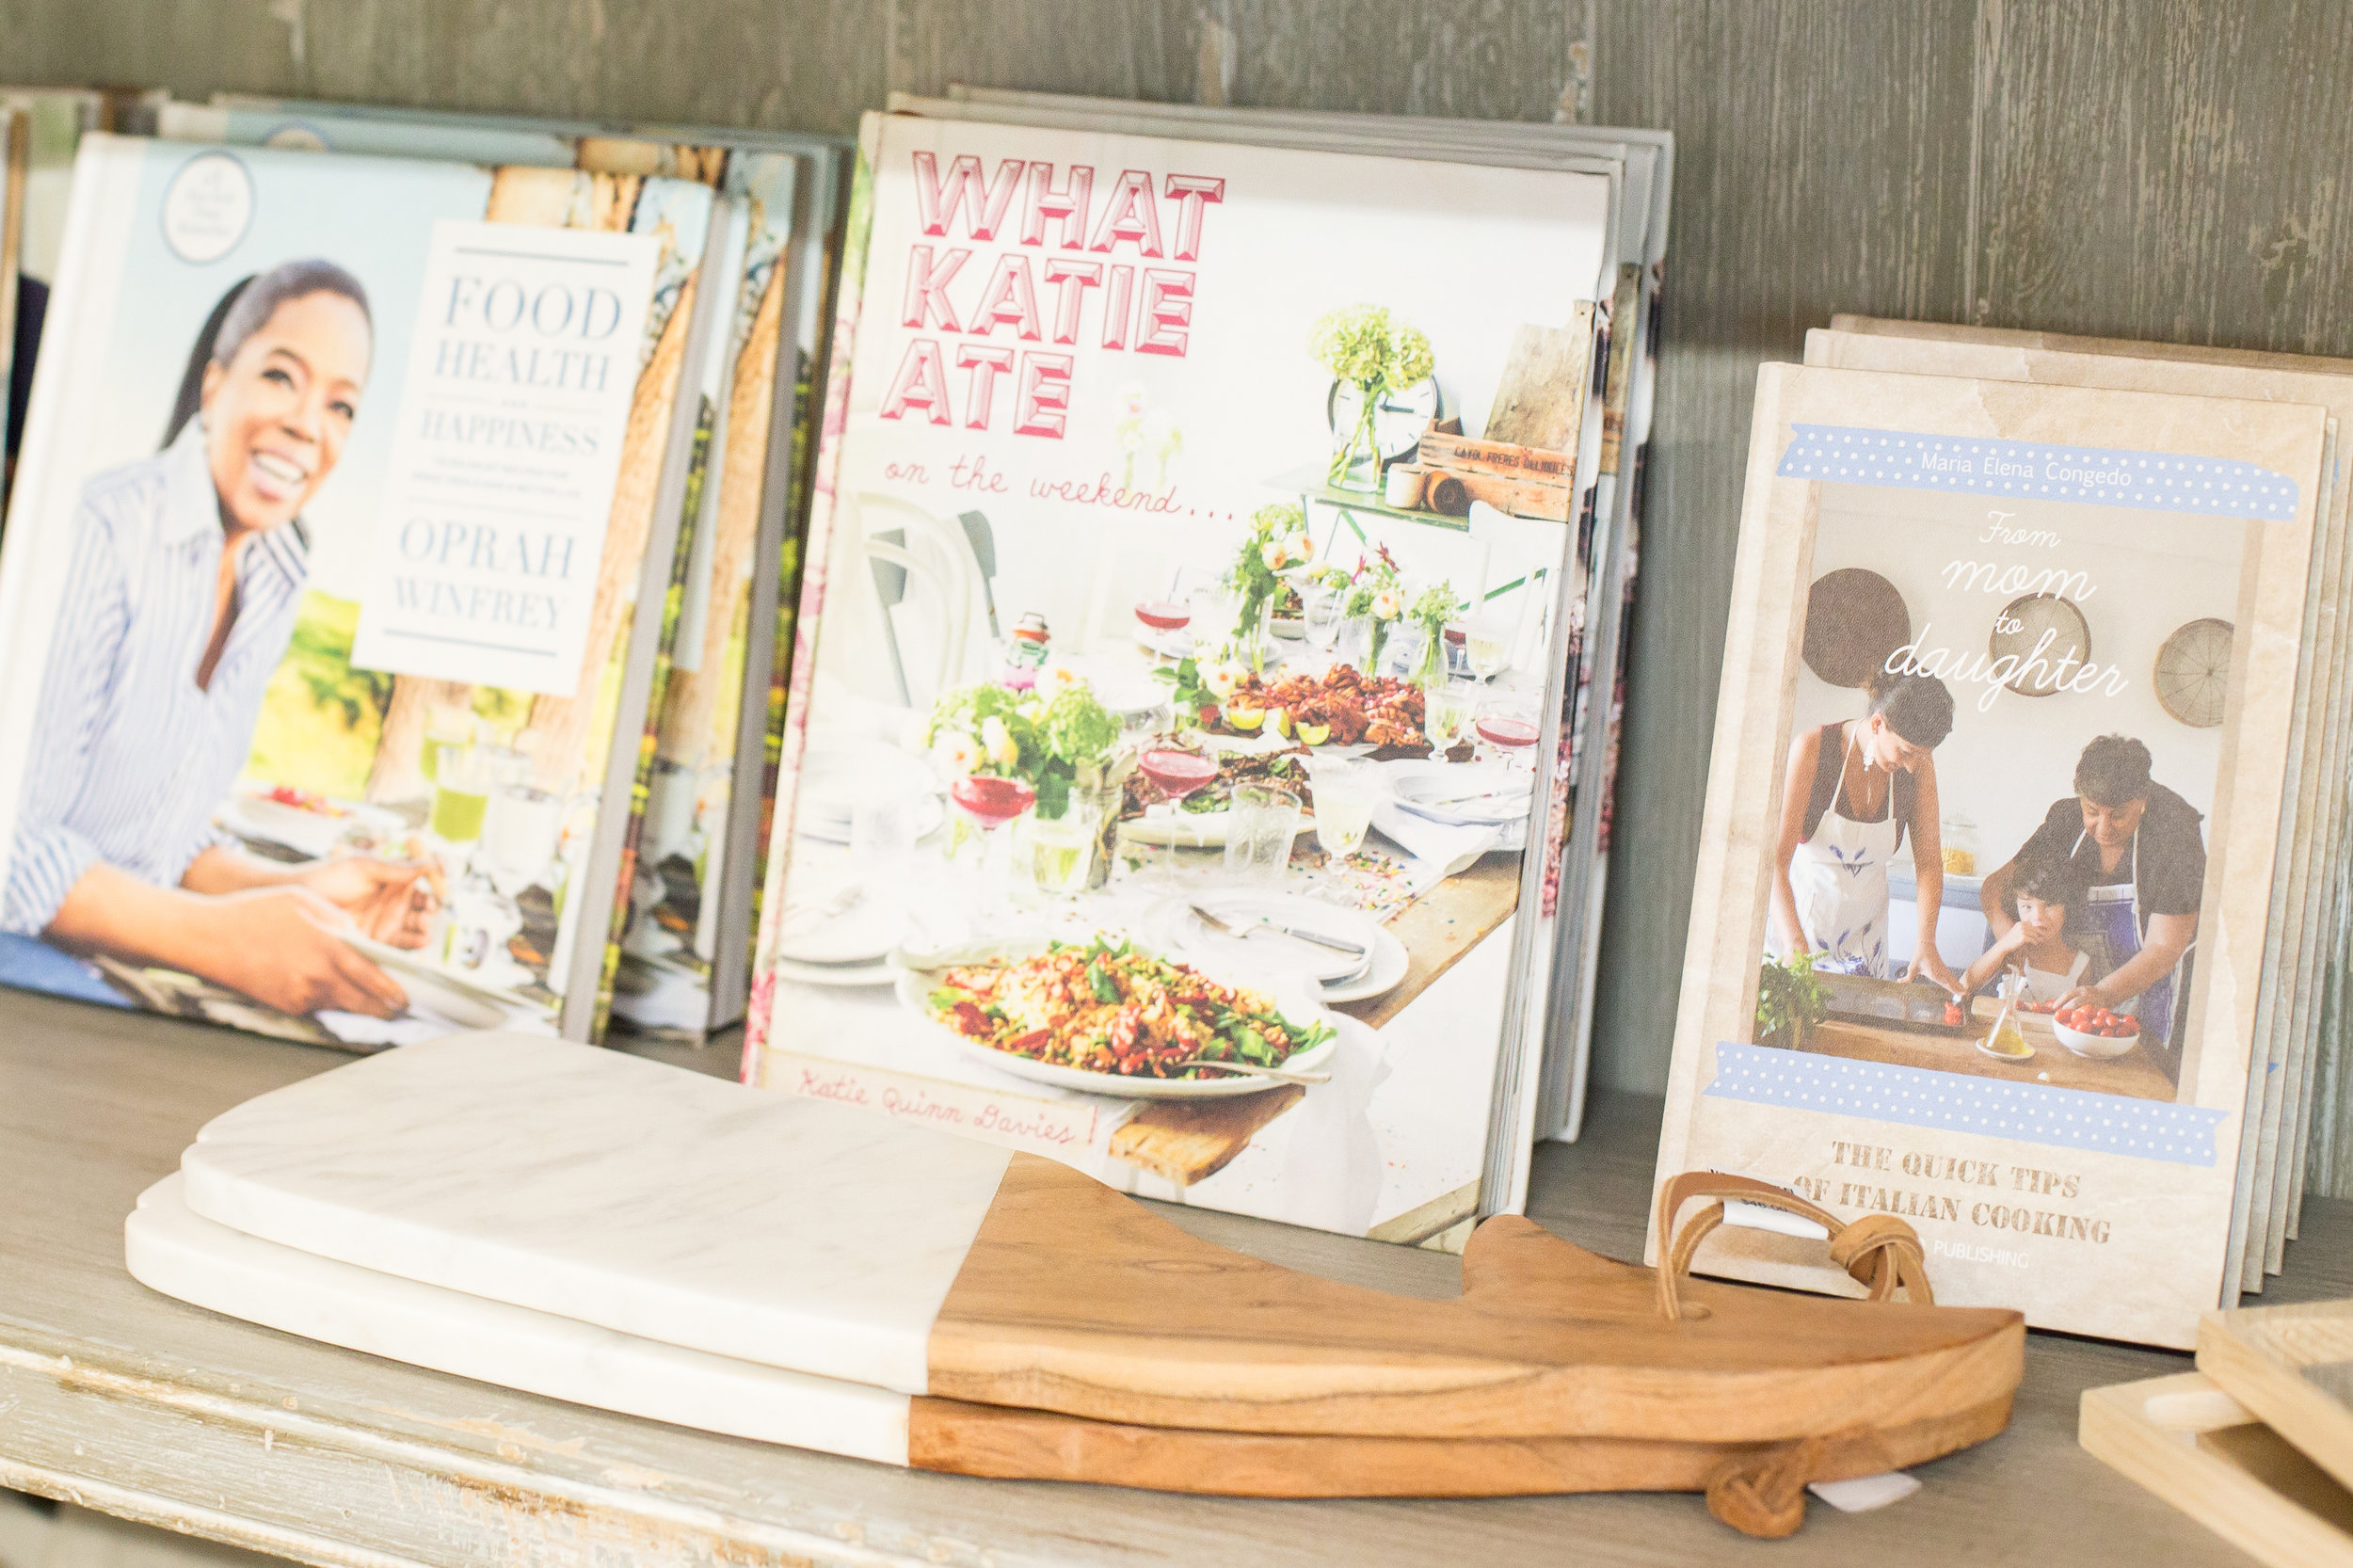 Bestselling design books and cookbooks